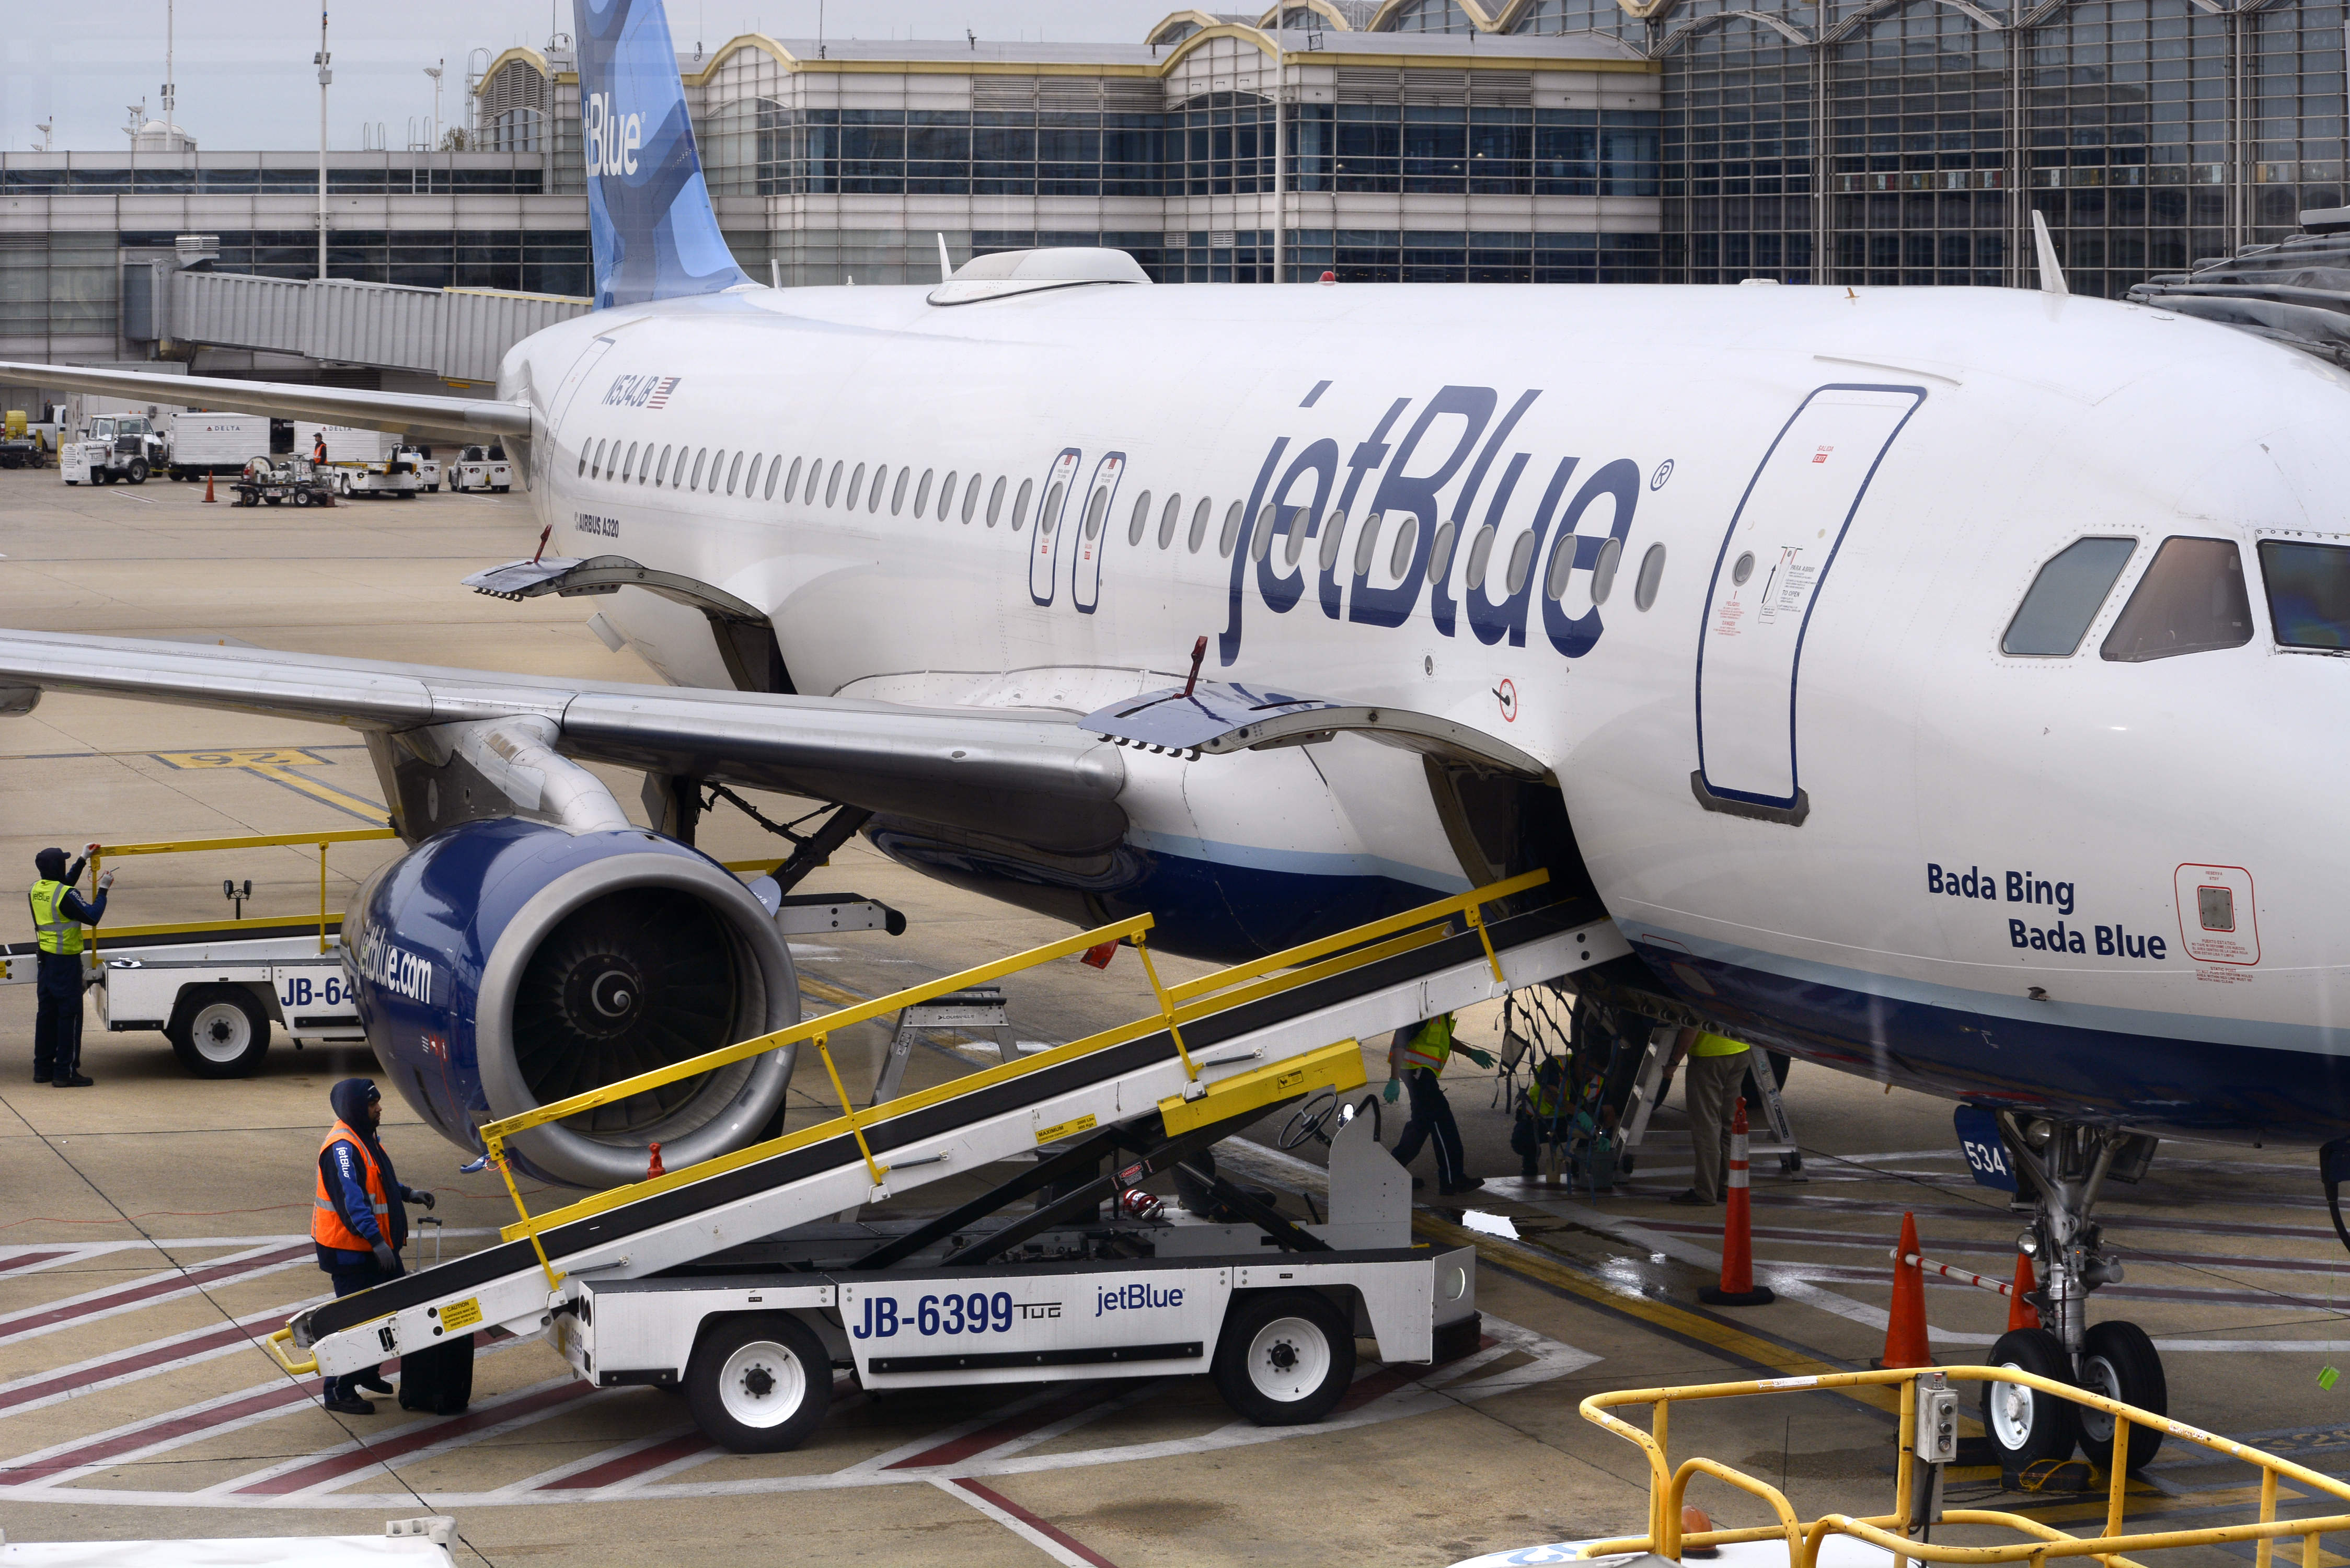 A JetBlue jet is serviced at a gate at the Ronald Reagan Washington National Airport in Washington, D.C. on April 24, 2018. (Robert Alexander—Getty Images)